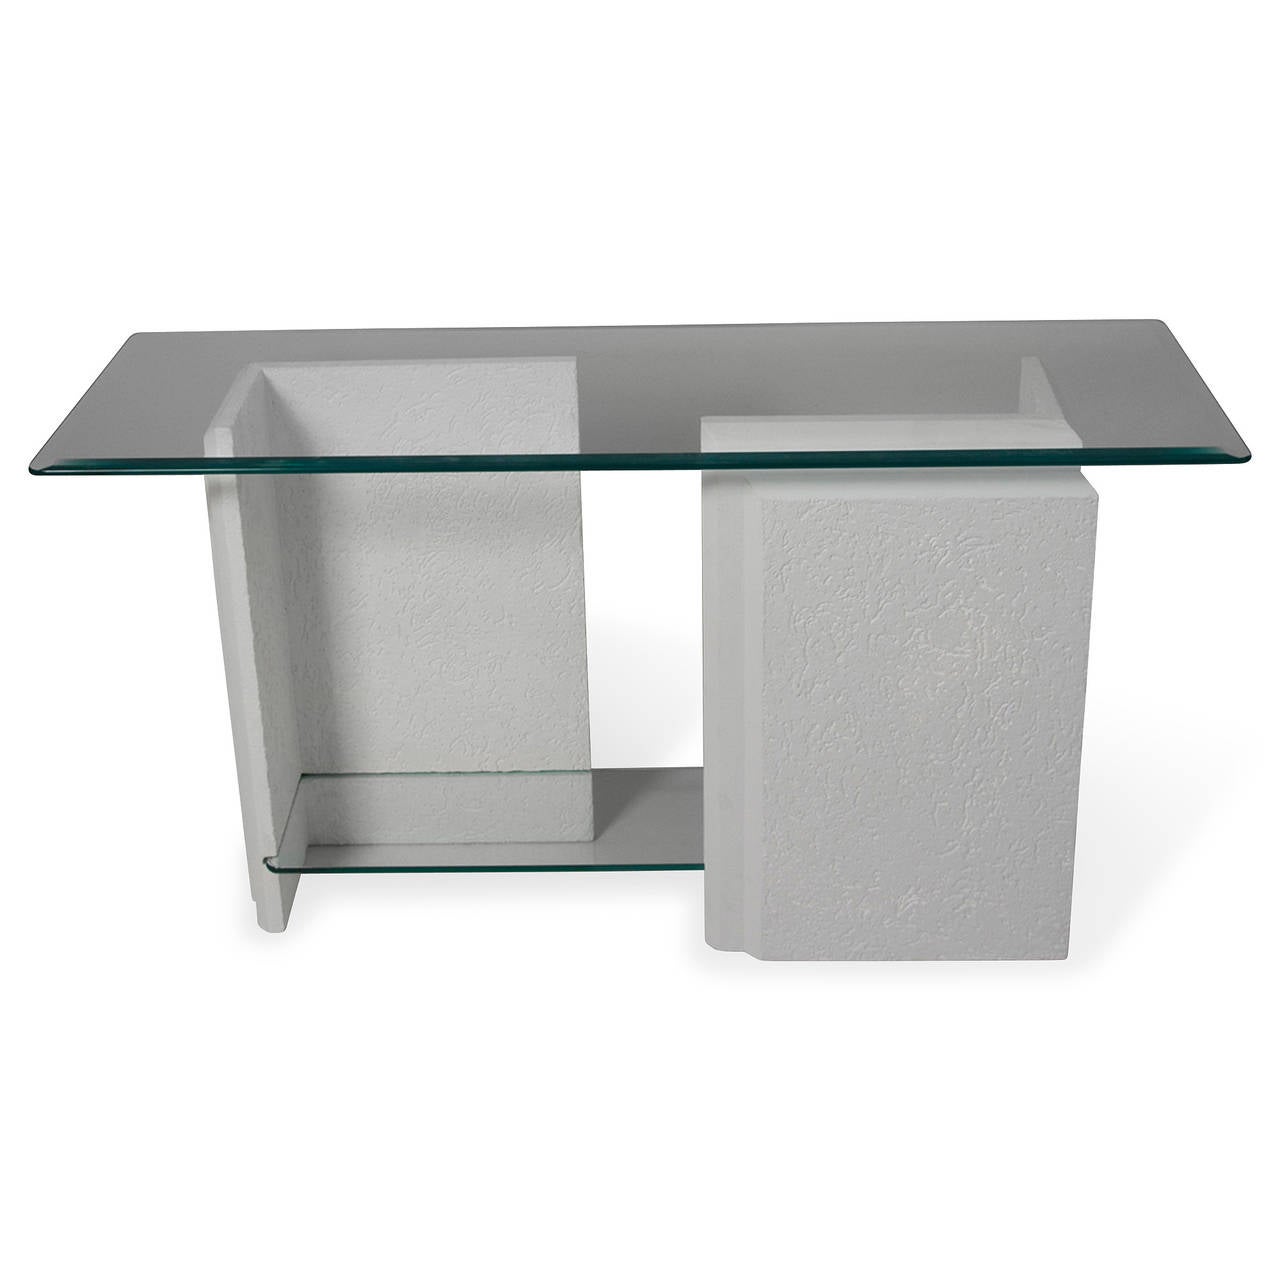 Stone console table, with beveled glass top and lower glass shelf mounted between the two L-shaped stone bases, the bases in a textured white with stepped molding along visible edges. American 1980s. Height 27 in, glass top measures 54 in x 18 in,